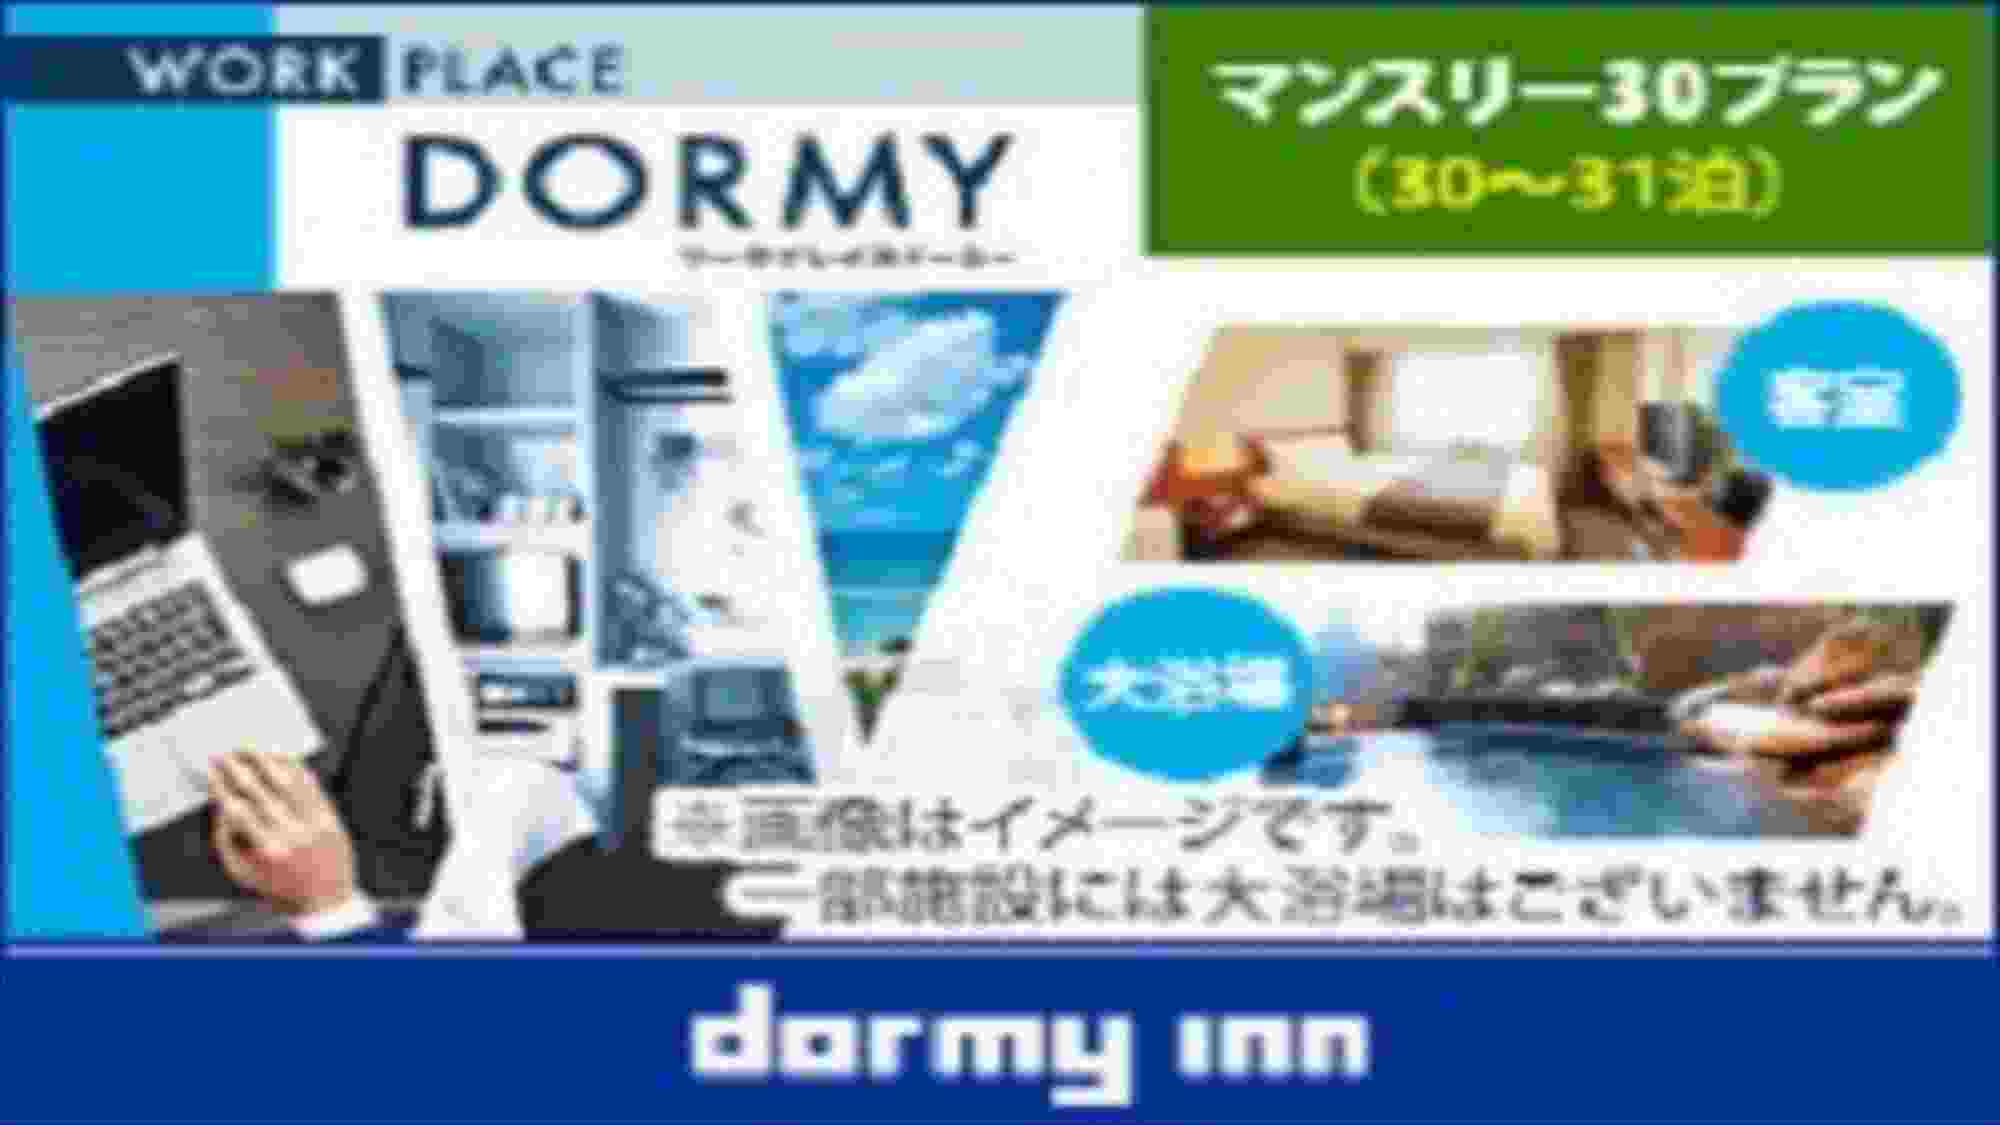 【WORK PLACE DORMY】マンスリープラン≪素泊まり≫